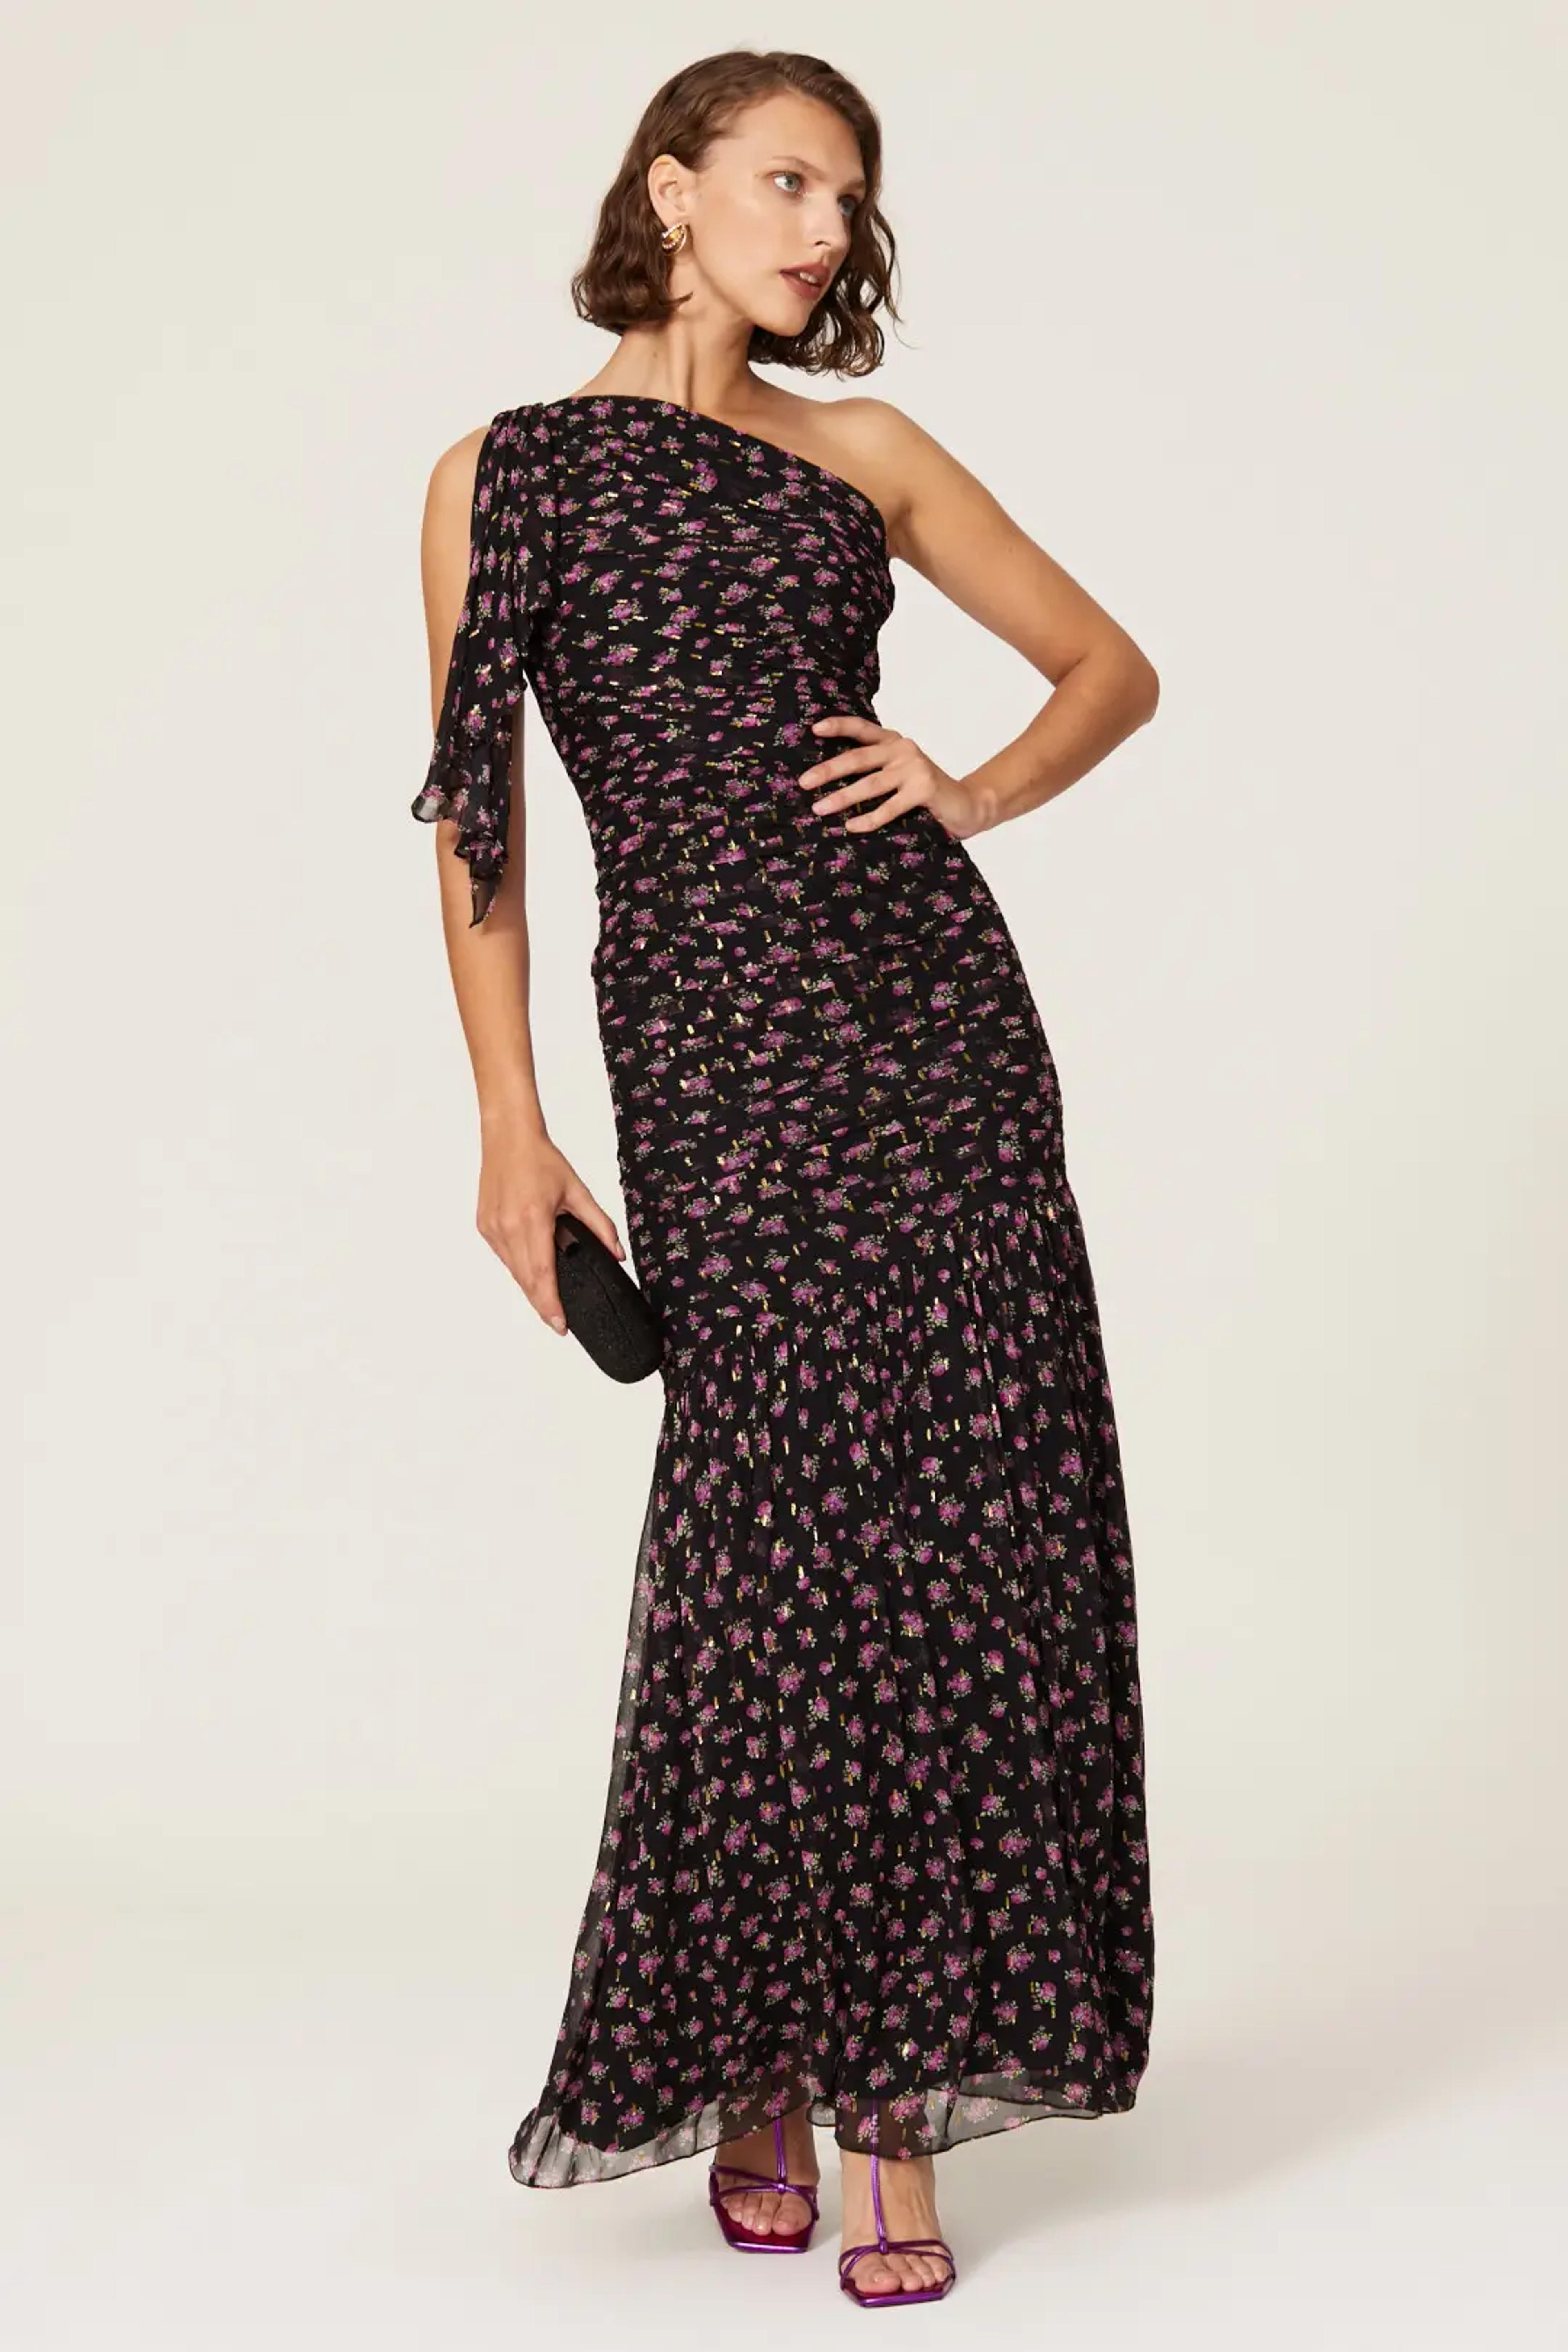 Vivine Tossed Rose Gown by Shoshanna for $65 - $80 | Rent the Runway